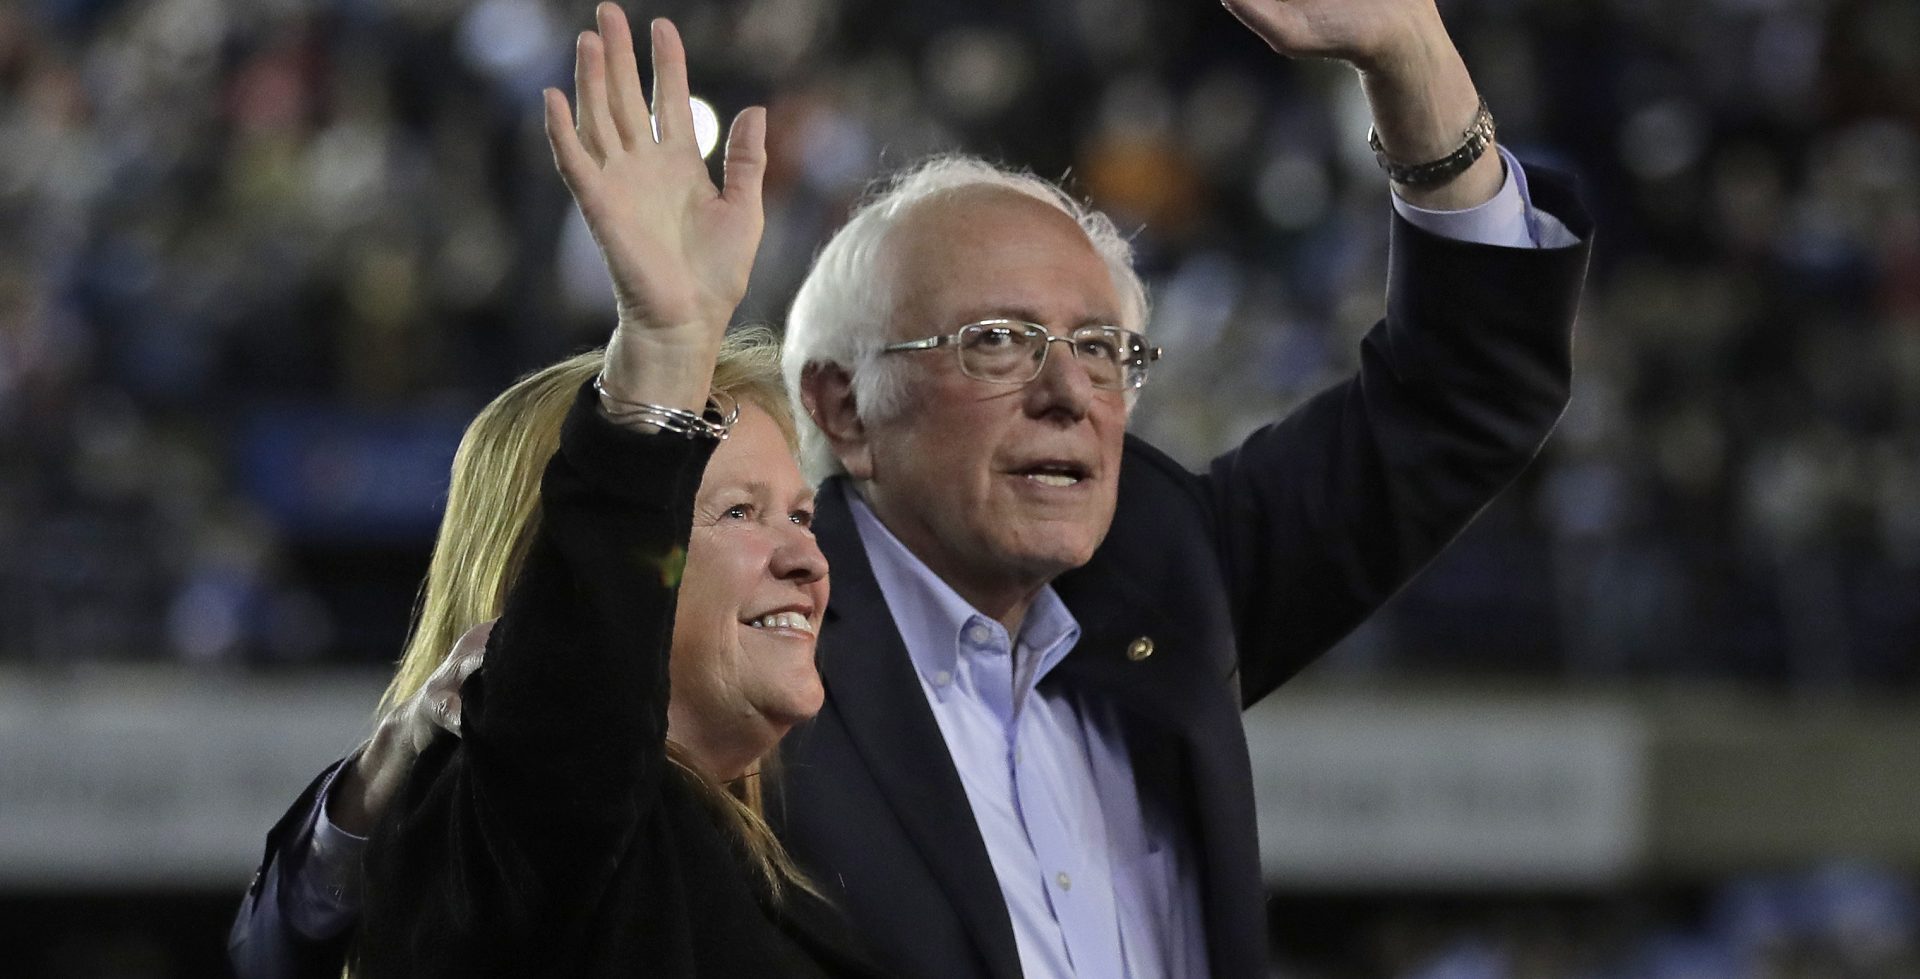 Democratic presidential candidate Sen. Bernie Sanders, I-Vt., waves with his wife, Jane, after his speech at a campaign event in Tacoma, Wash., on Feb. 17.